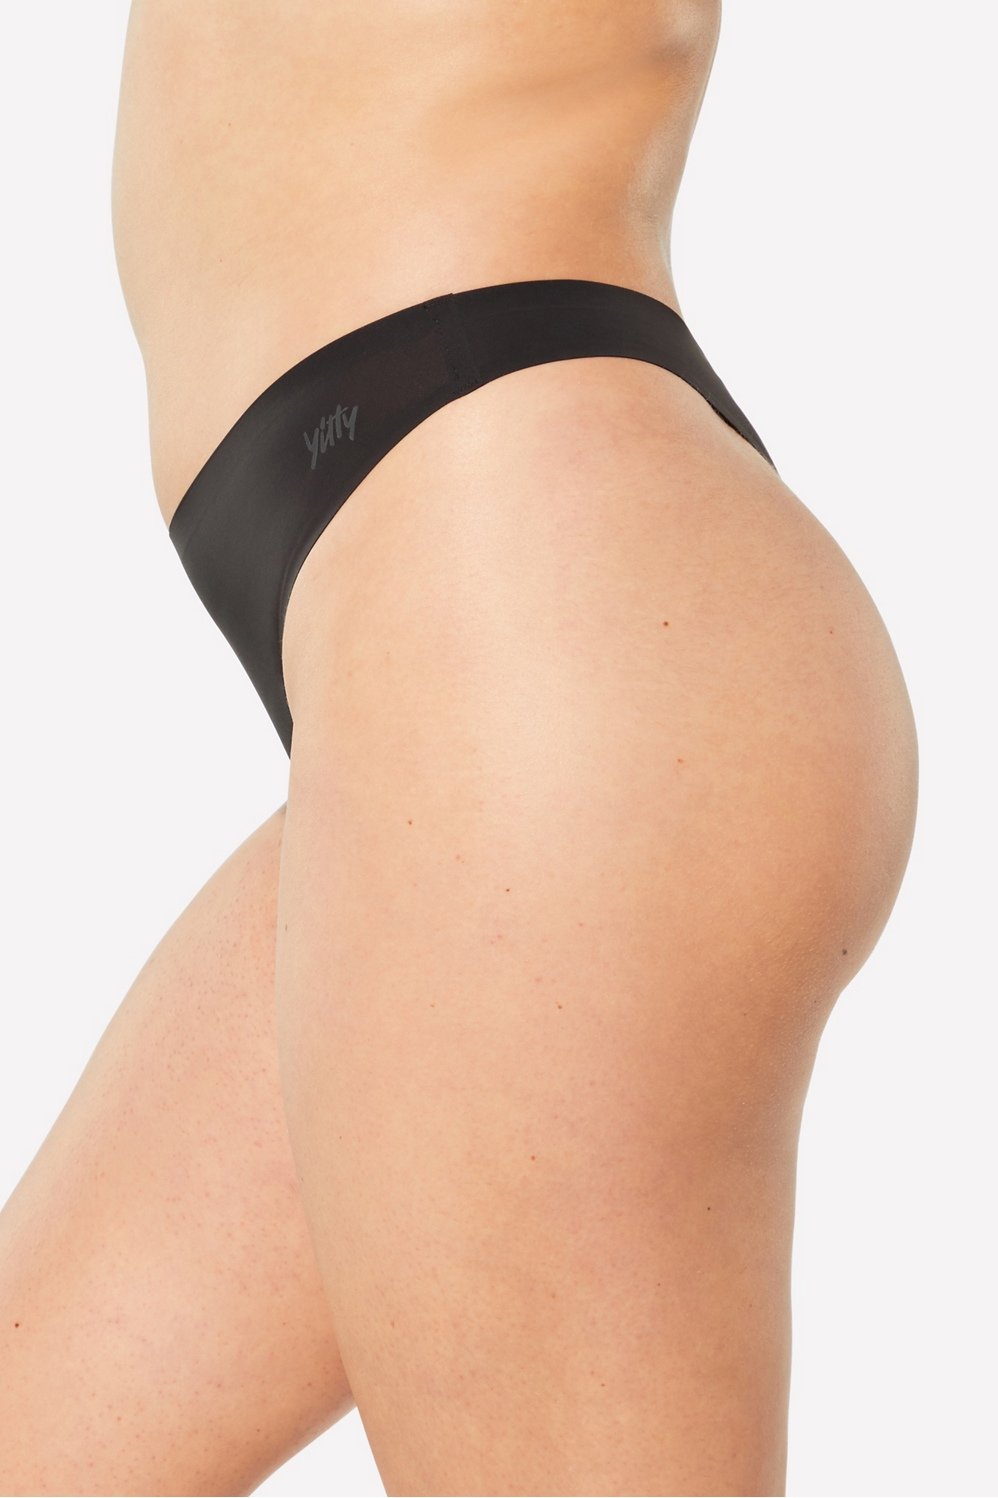 The Everyday Thong - - Fabletics Canada